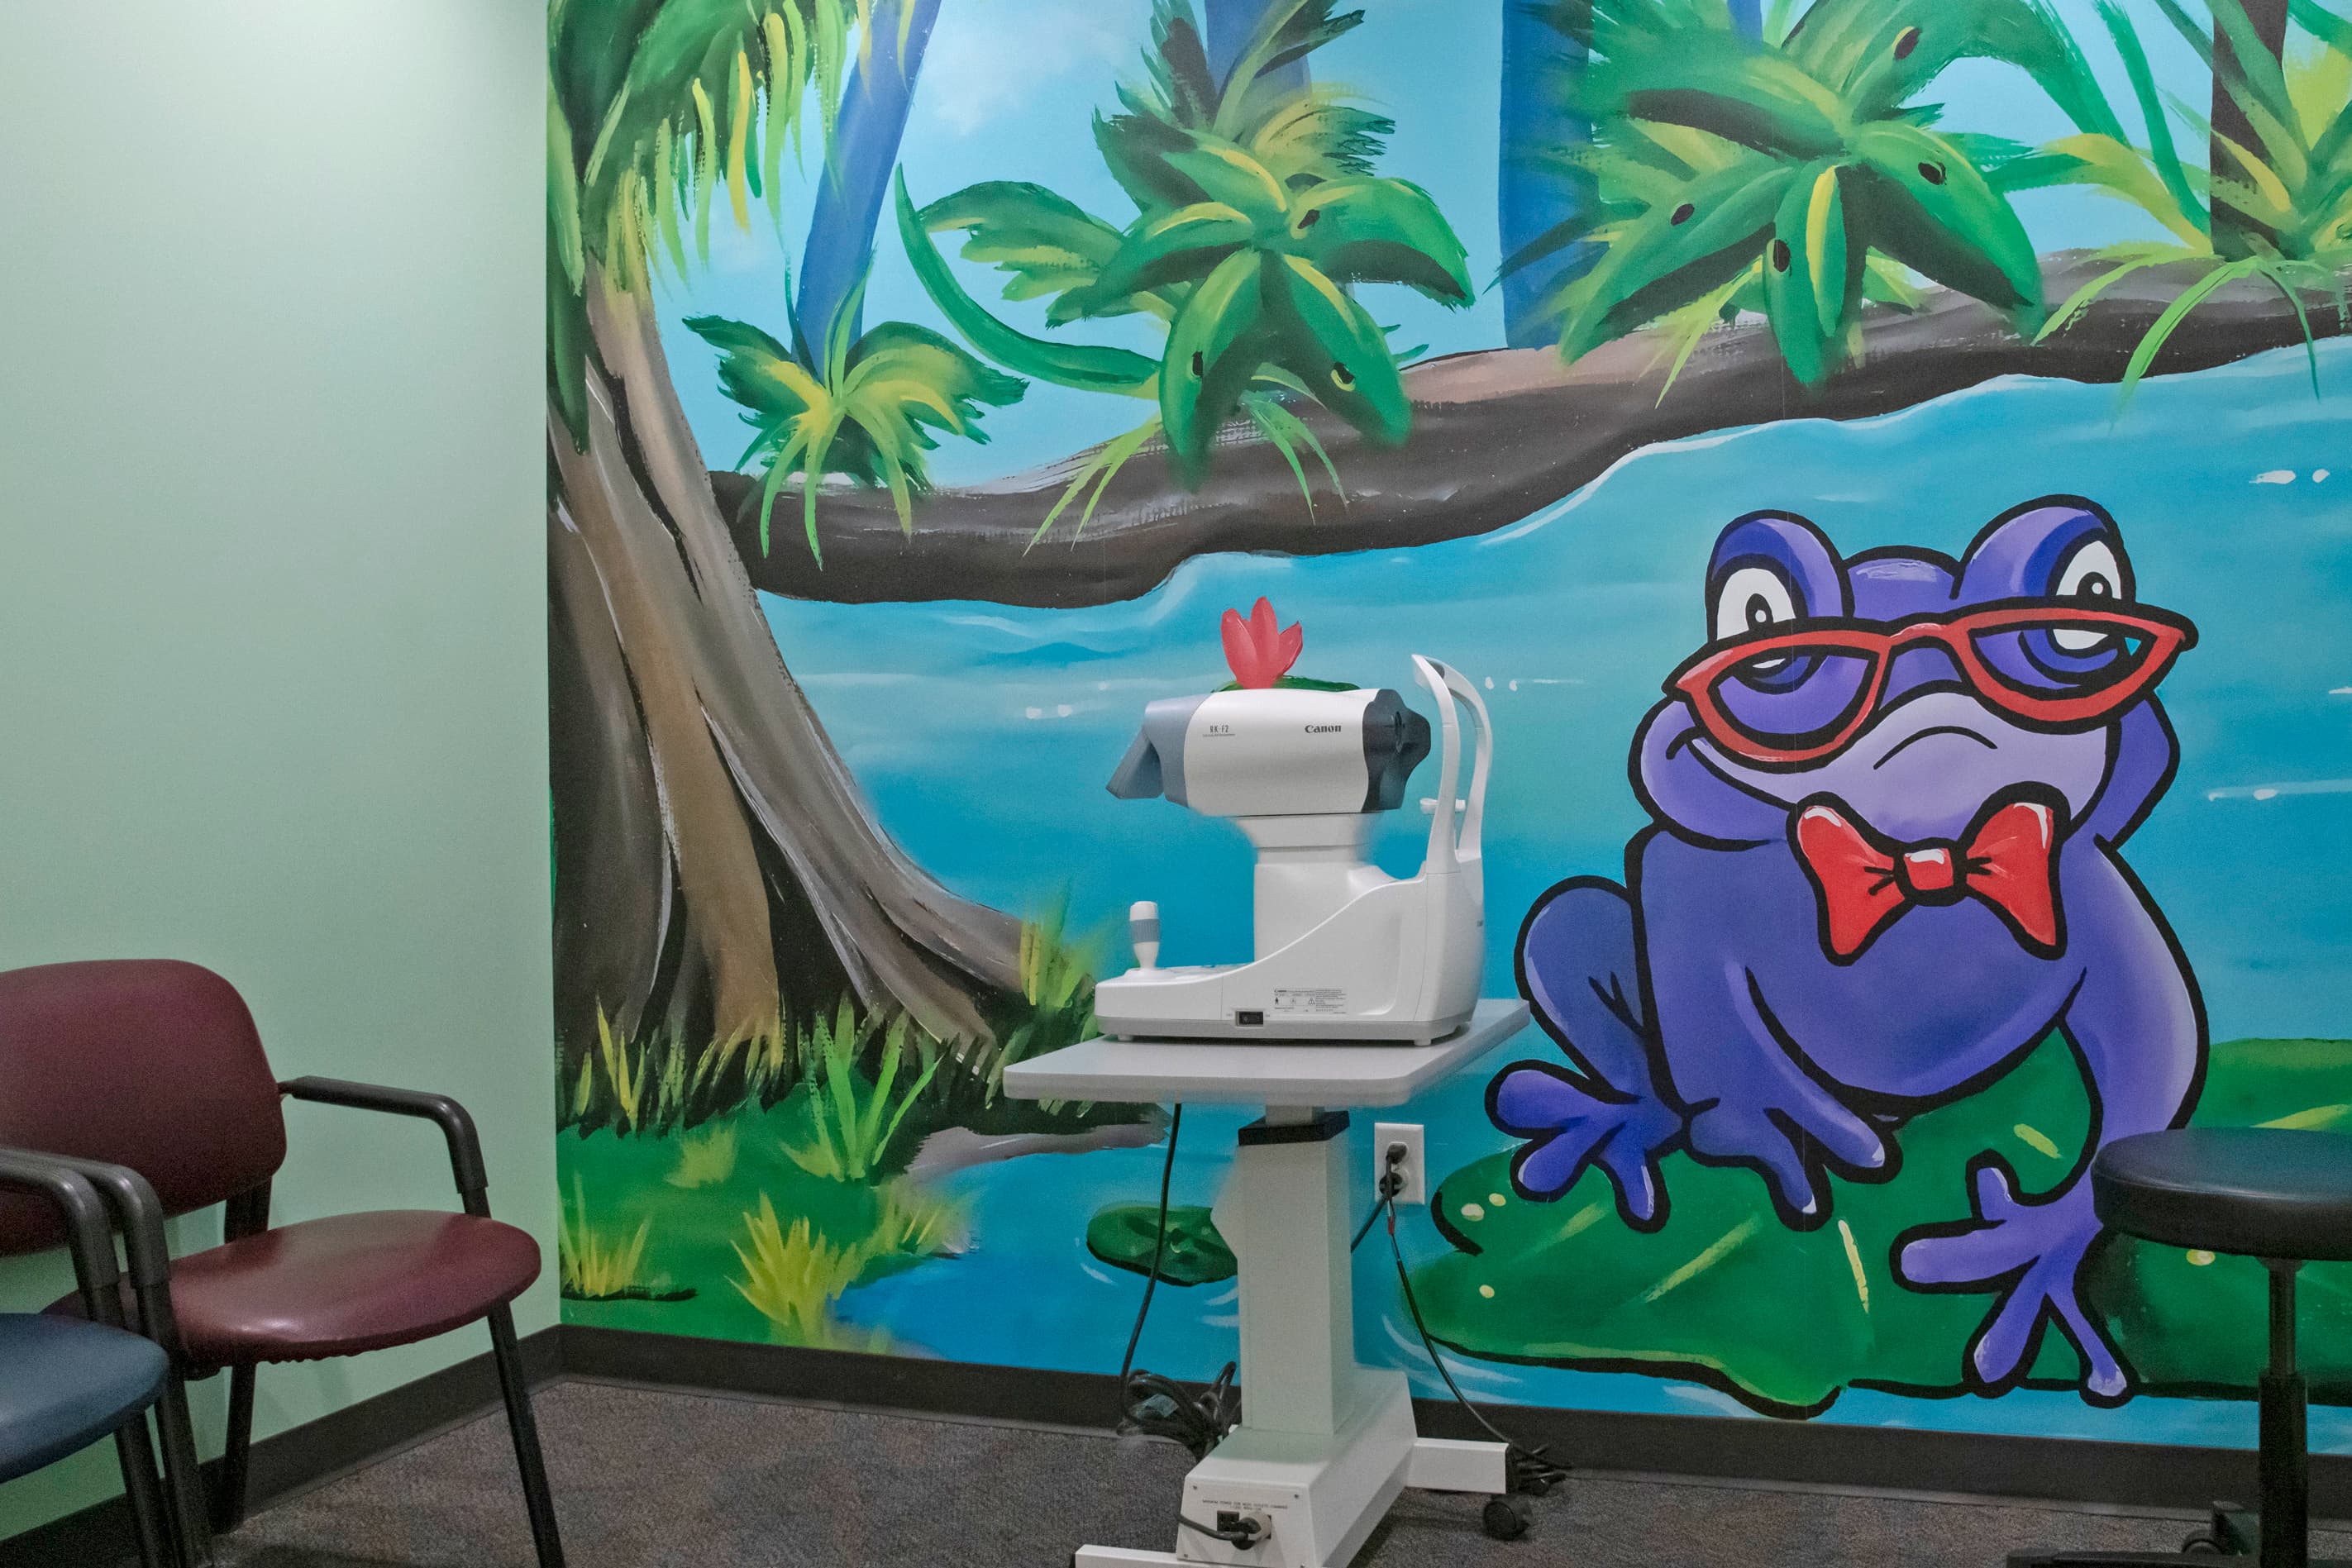 a wall mural in a vision exam room of a purple frog wearing red glasses